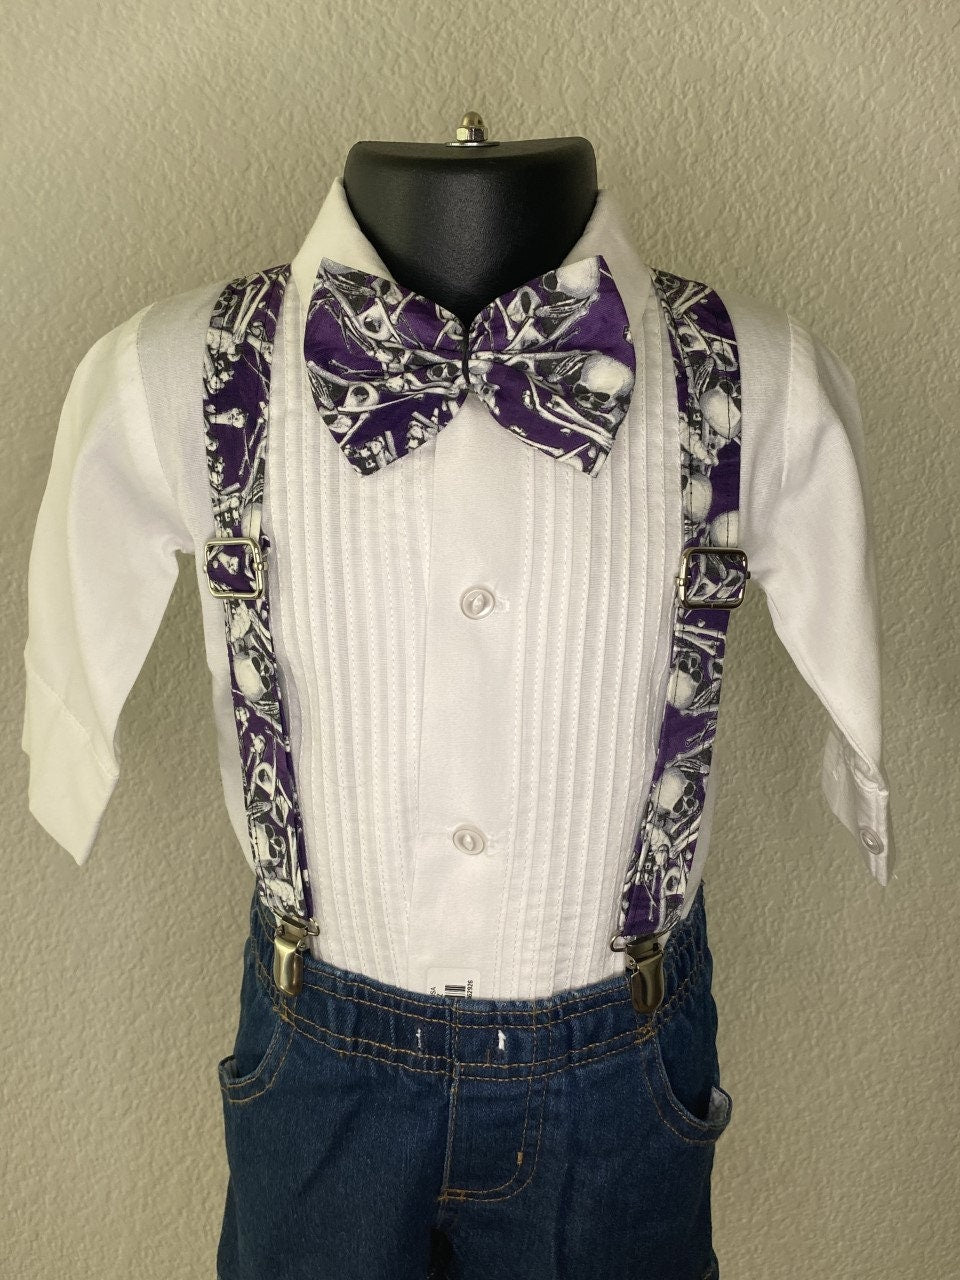 Halloween Skeleton Skull Purple suspenders and bow tie / Infant, Toddler, Child, Teen, Adult, Big & Tall